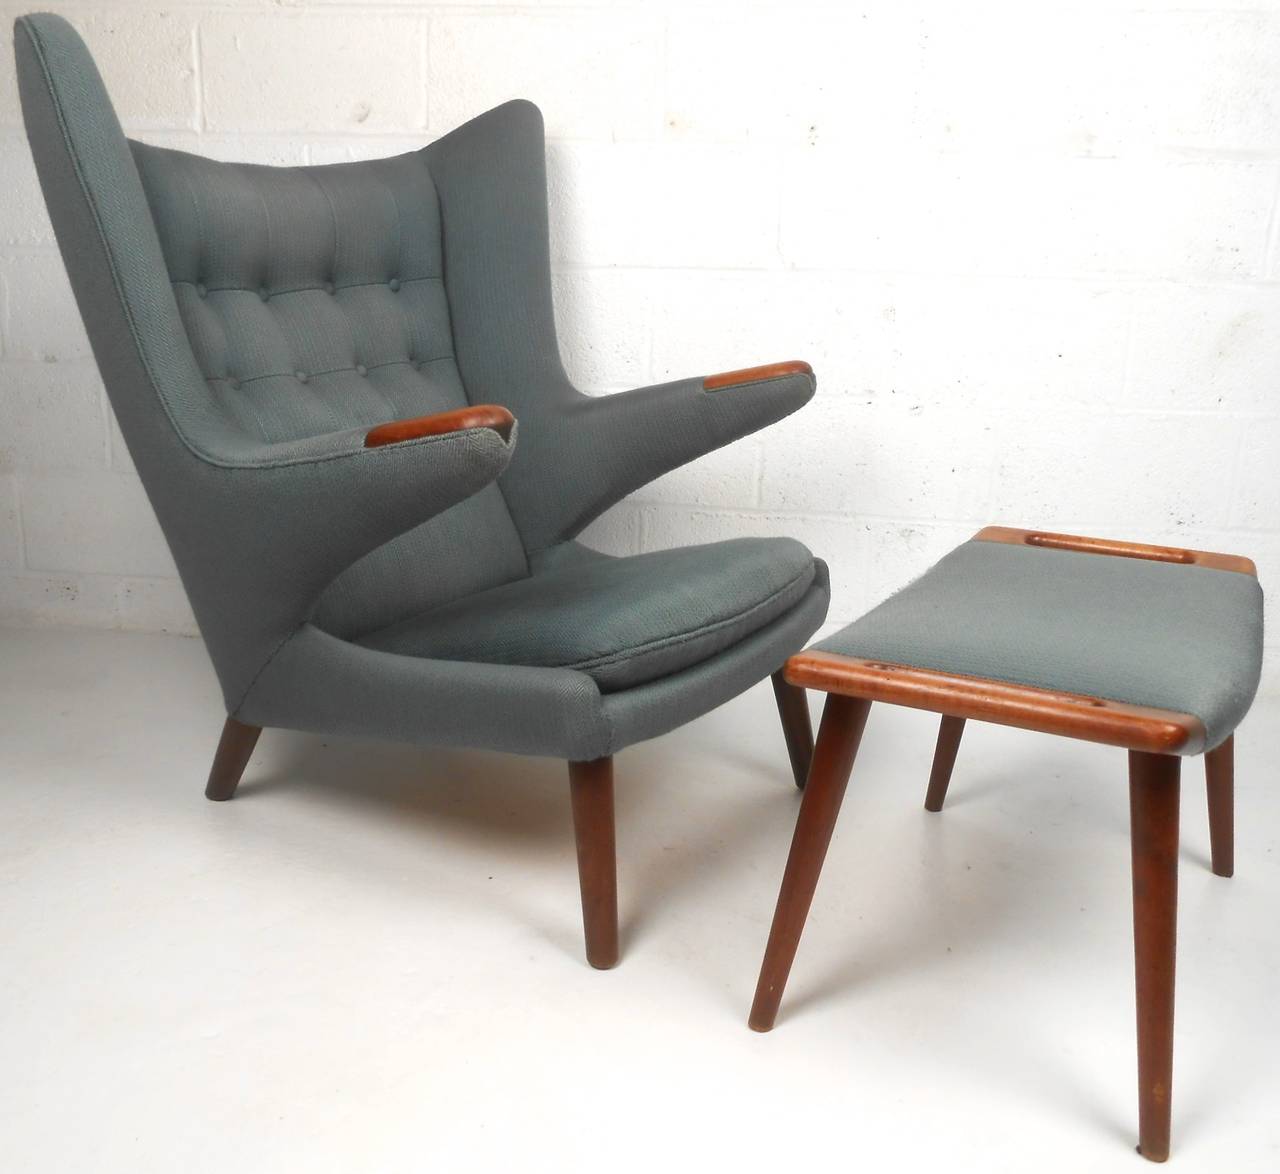 This matching Wegner chair and ottoman are a must have for any Mid-Century enthusiast. This widely celebrated design (AP19) by AP Stolen dates back to the 1950s and combines comfort and style in a truly unique fashion. Please confirm item location